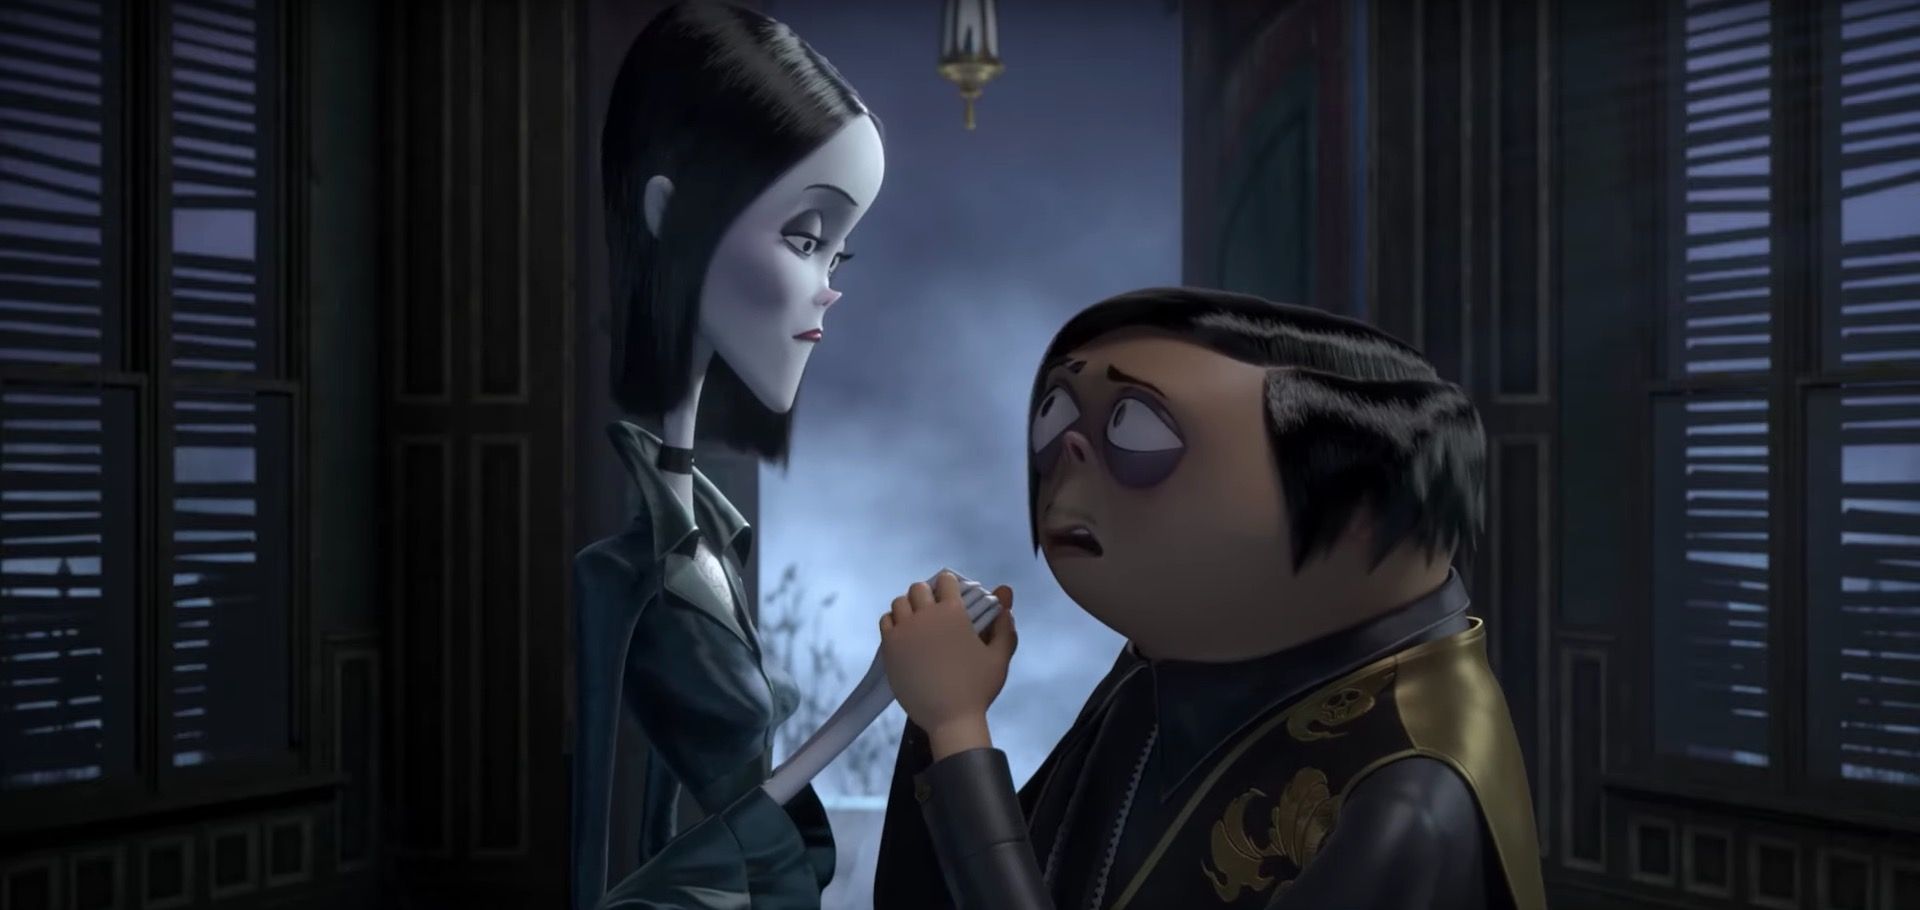 Addams Family trailer - The Addams Family return in creepy and kooky first  trailer